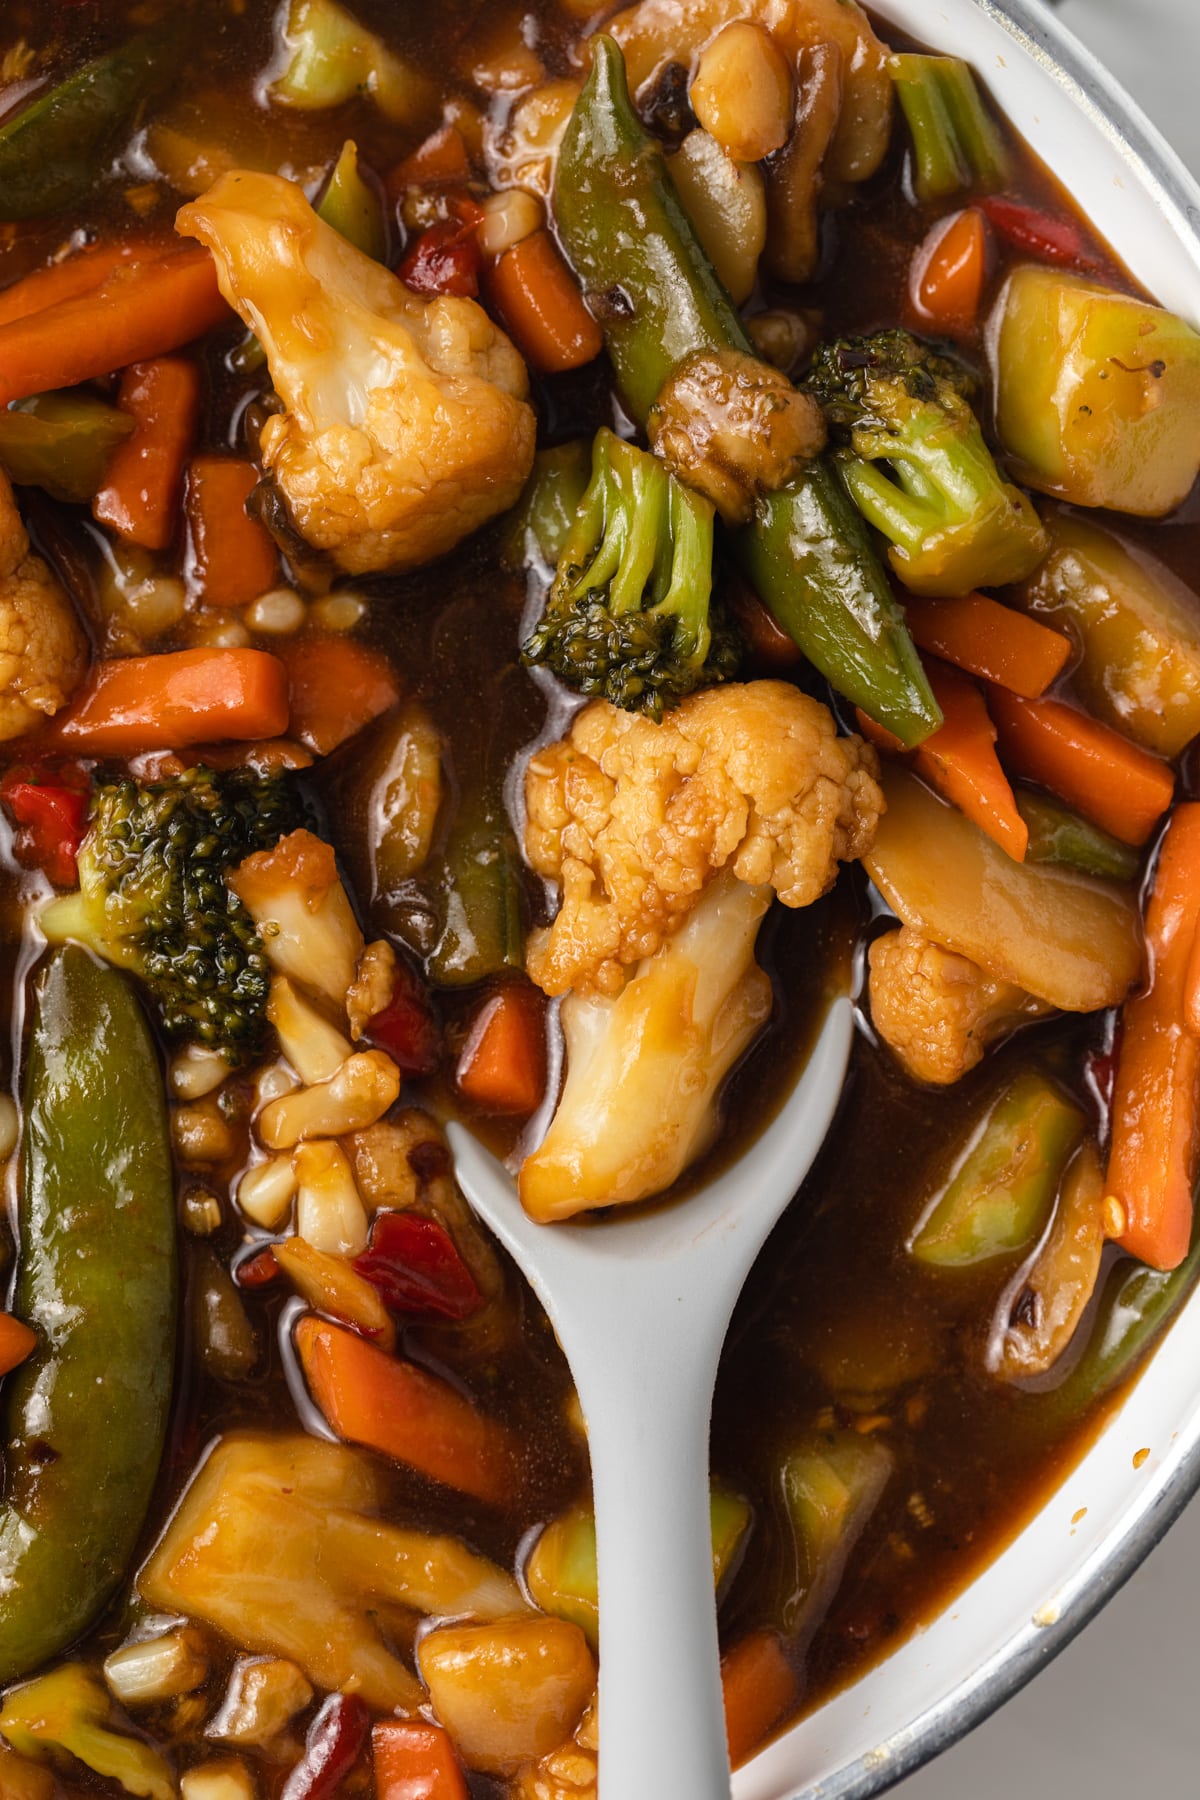 Close up of vegetables in stir fry sauce.